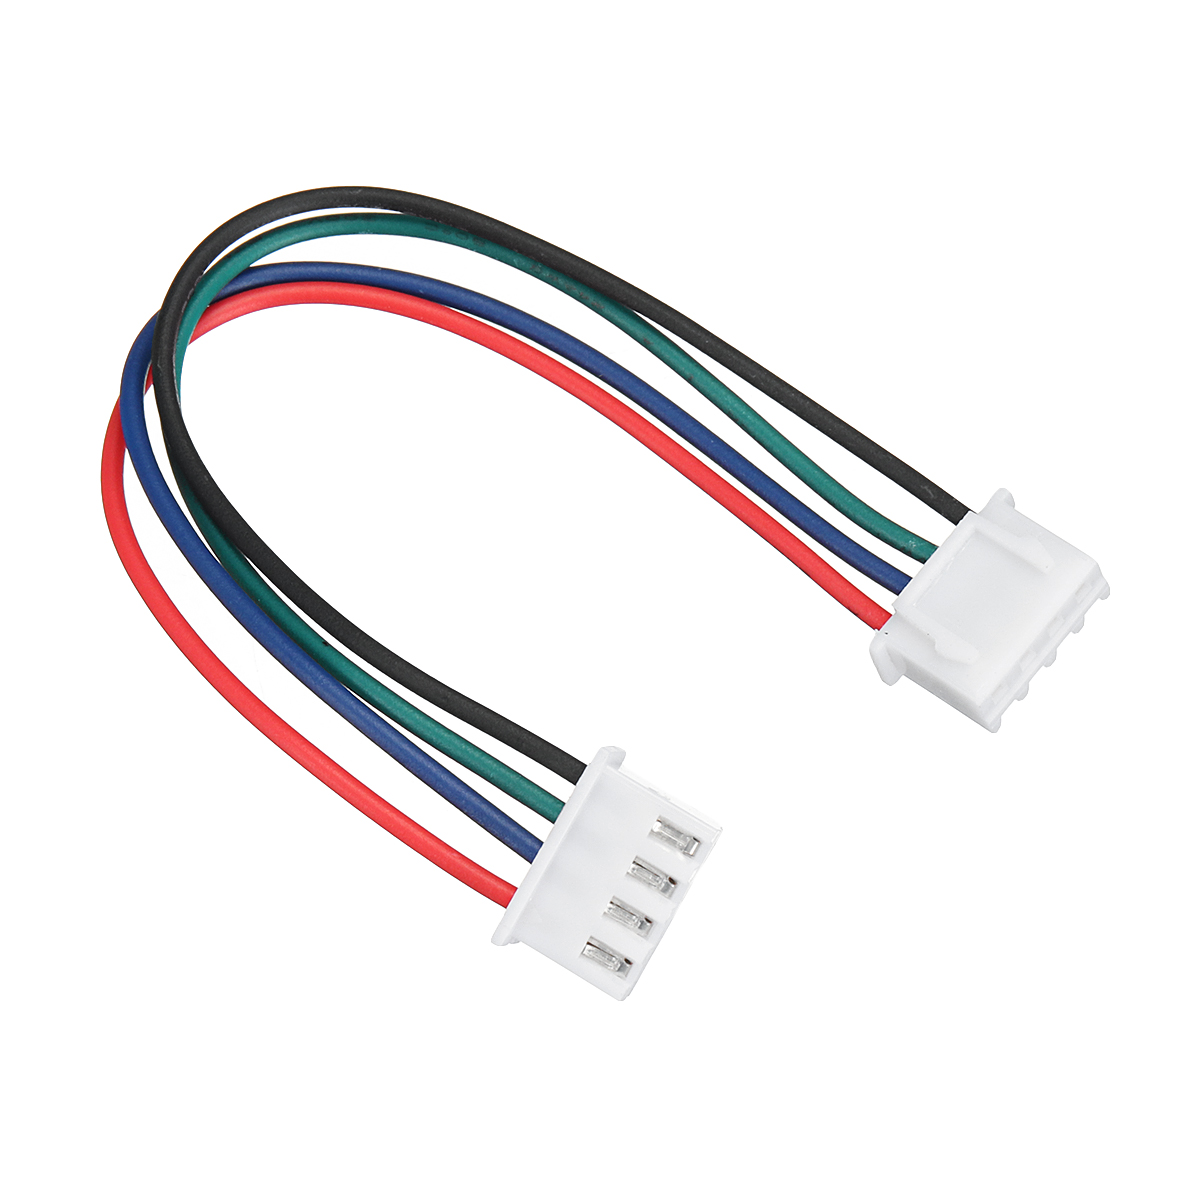 3PCS TL-Smoother Addon Module With Dupont Line For 3D Printer Stepper Motor 12